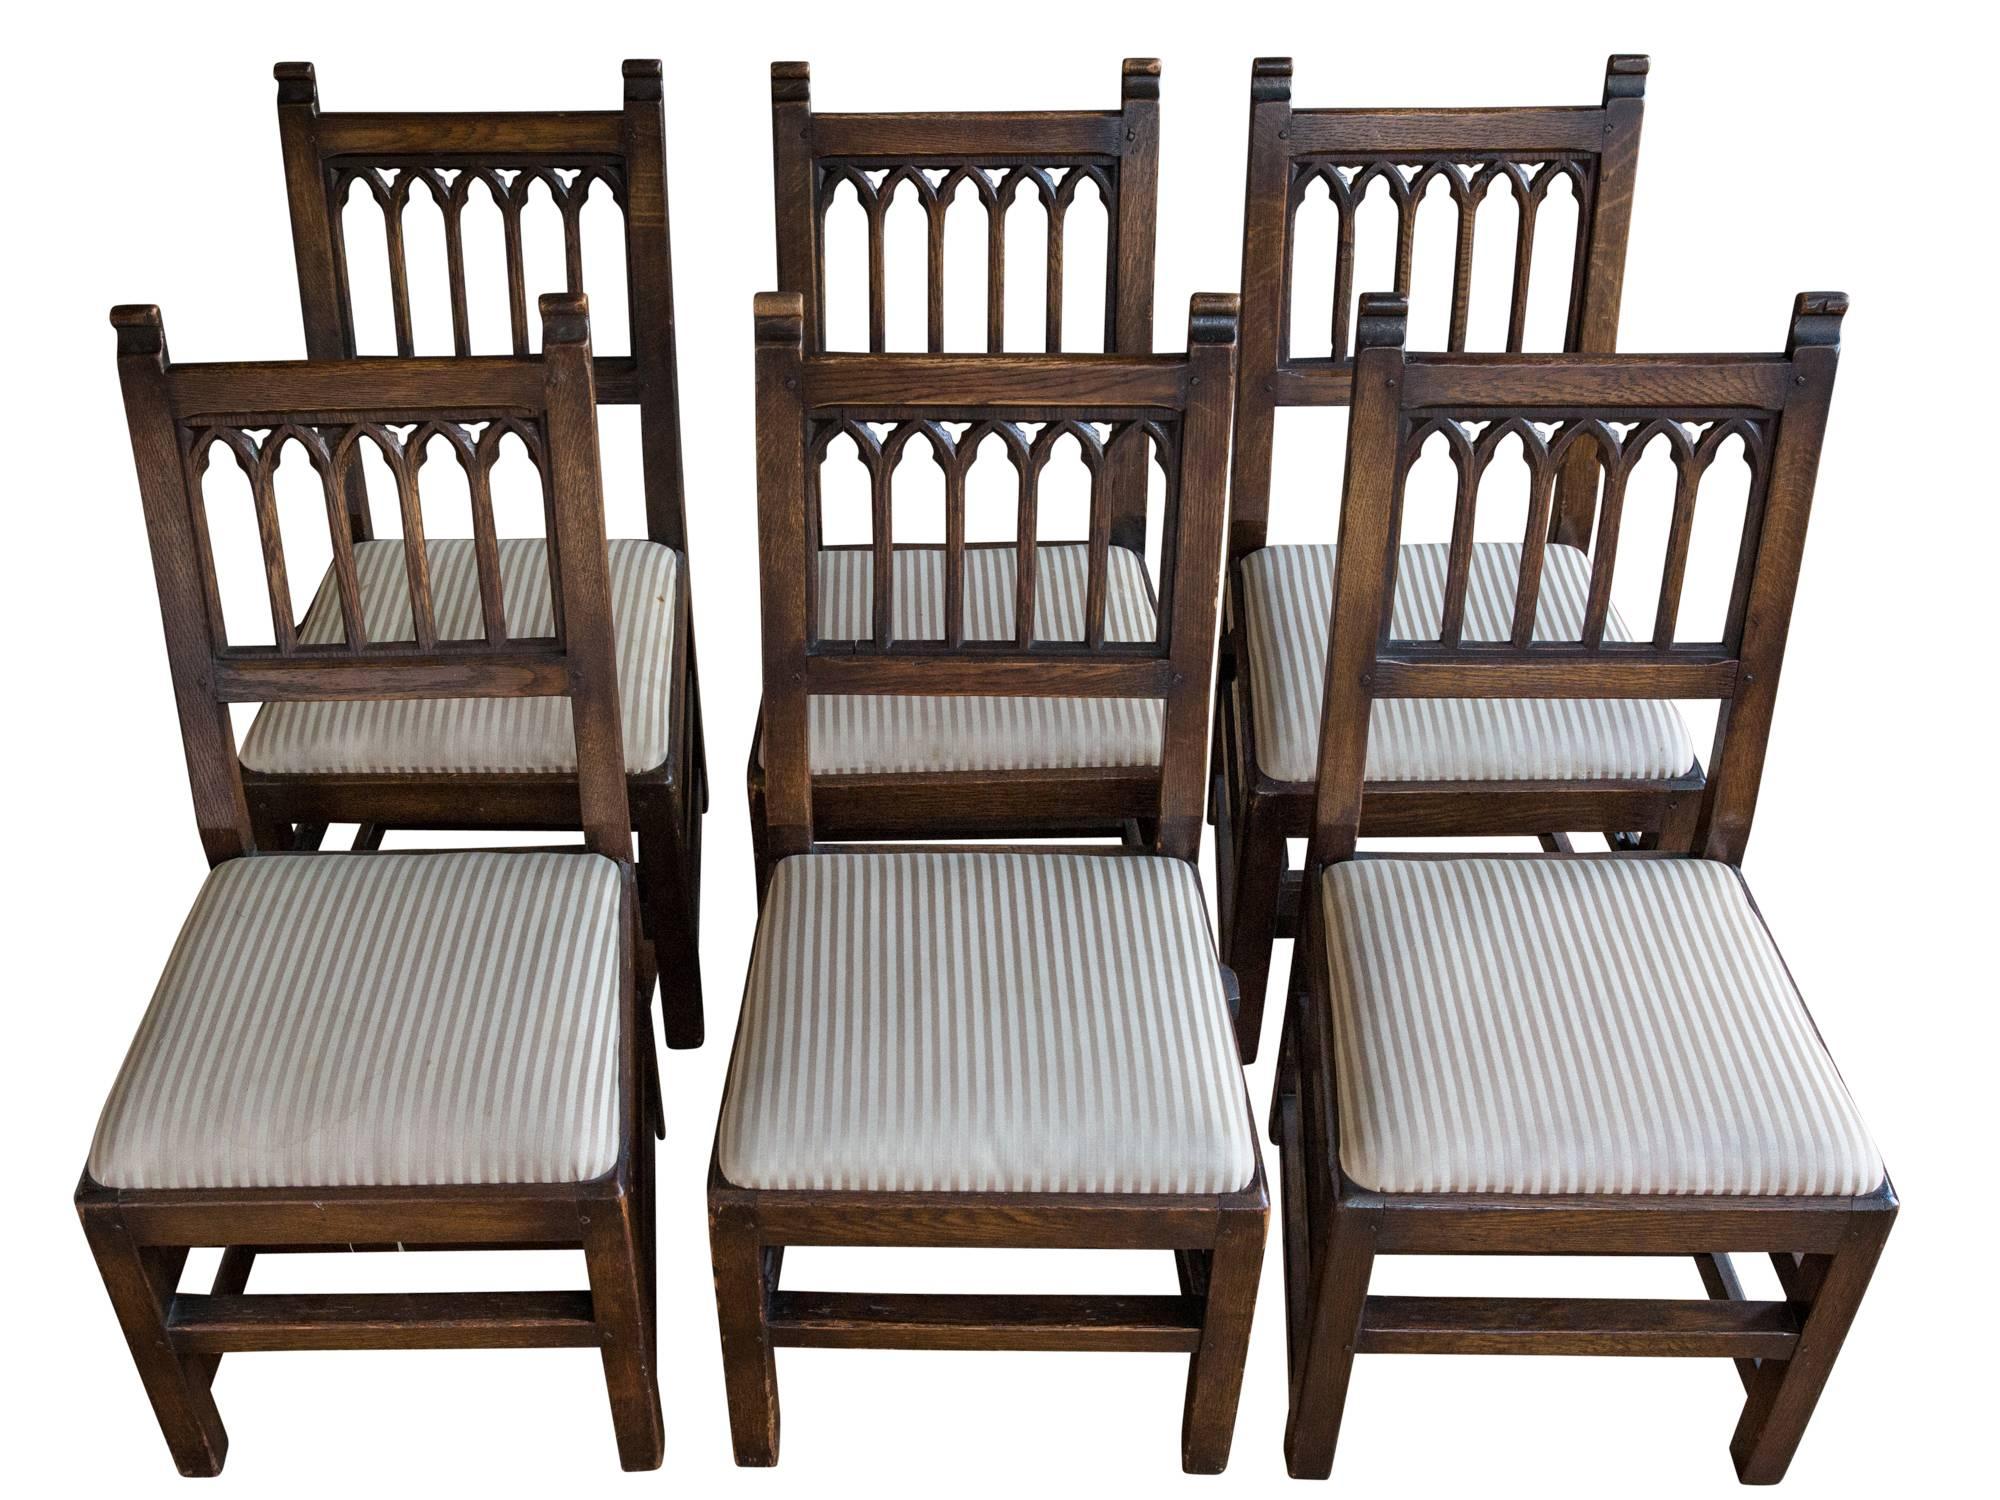 A set of six pew chairs from New York City's Riverside Church, circa 1930s. Consisting of solid carved oak frames with Gothic arched splat and upholstered seats supported by square legs joined by stretchers. Chairs also feature integrated book rack